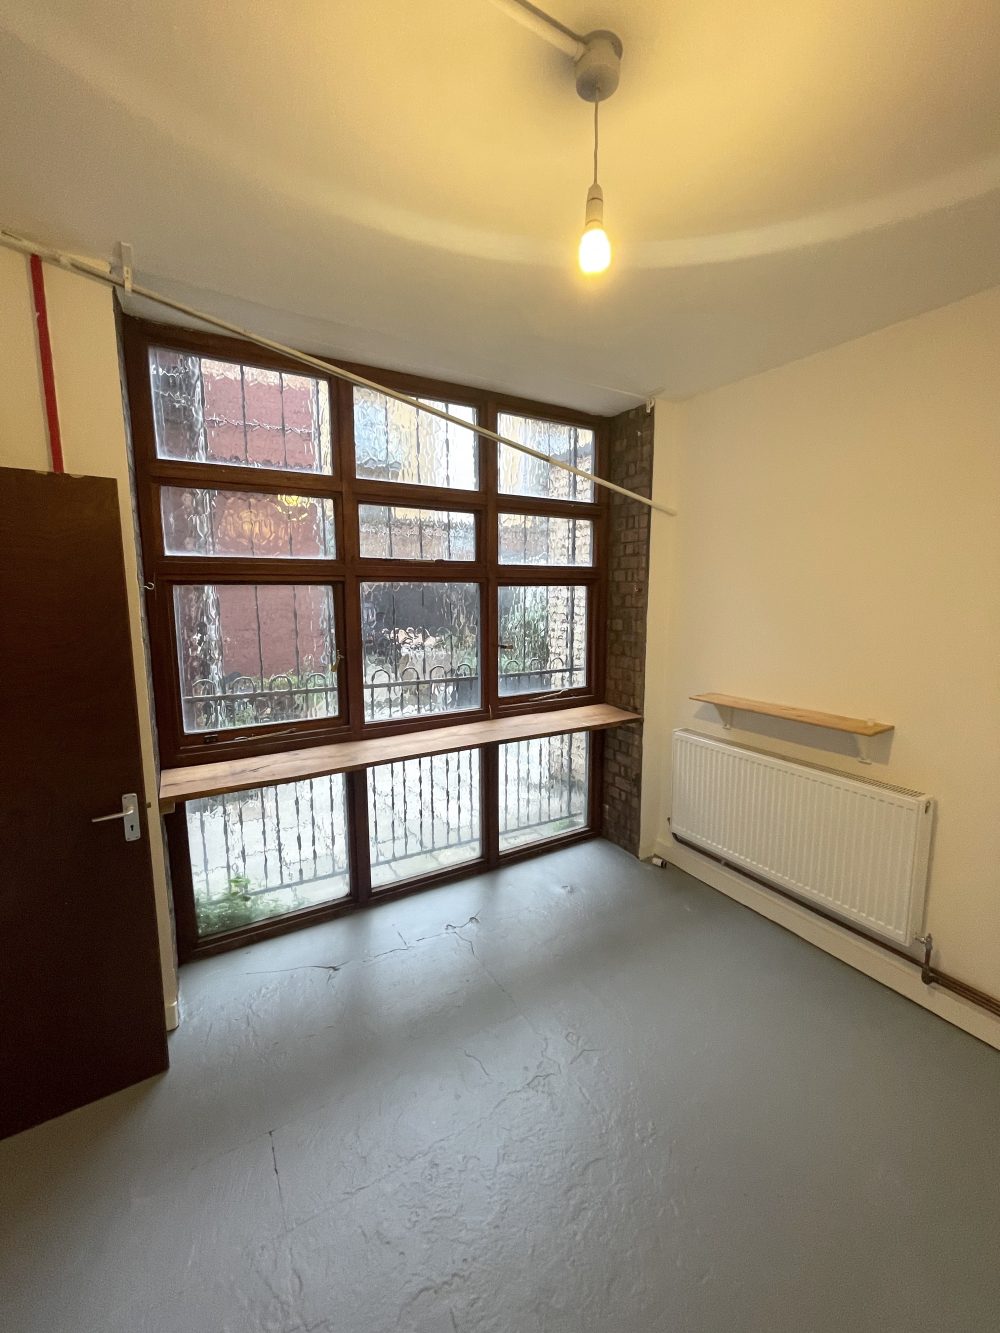 2 Bedroom Flat Available to rent in E9 London Fields Enterprise House Pic23